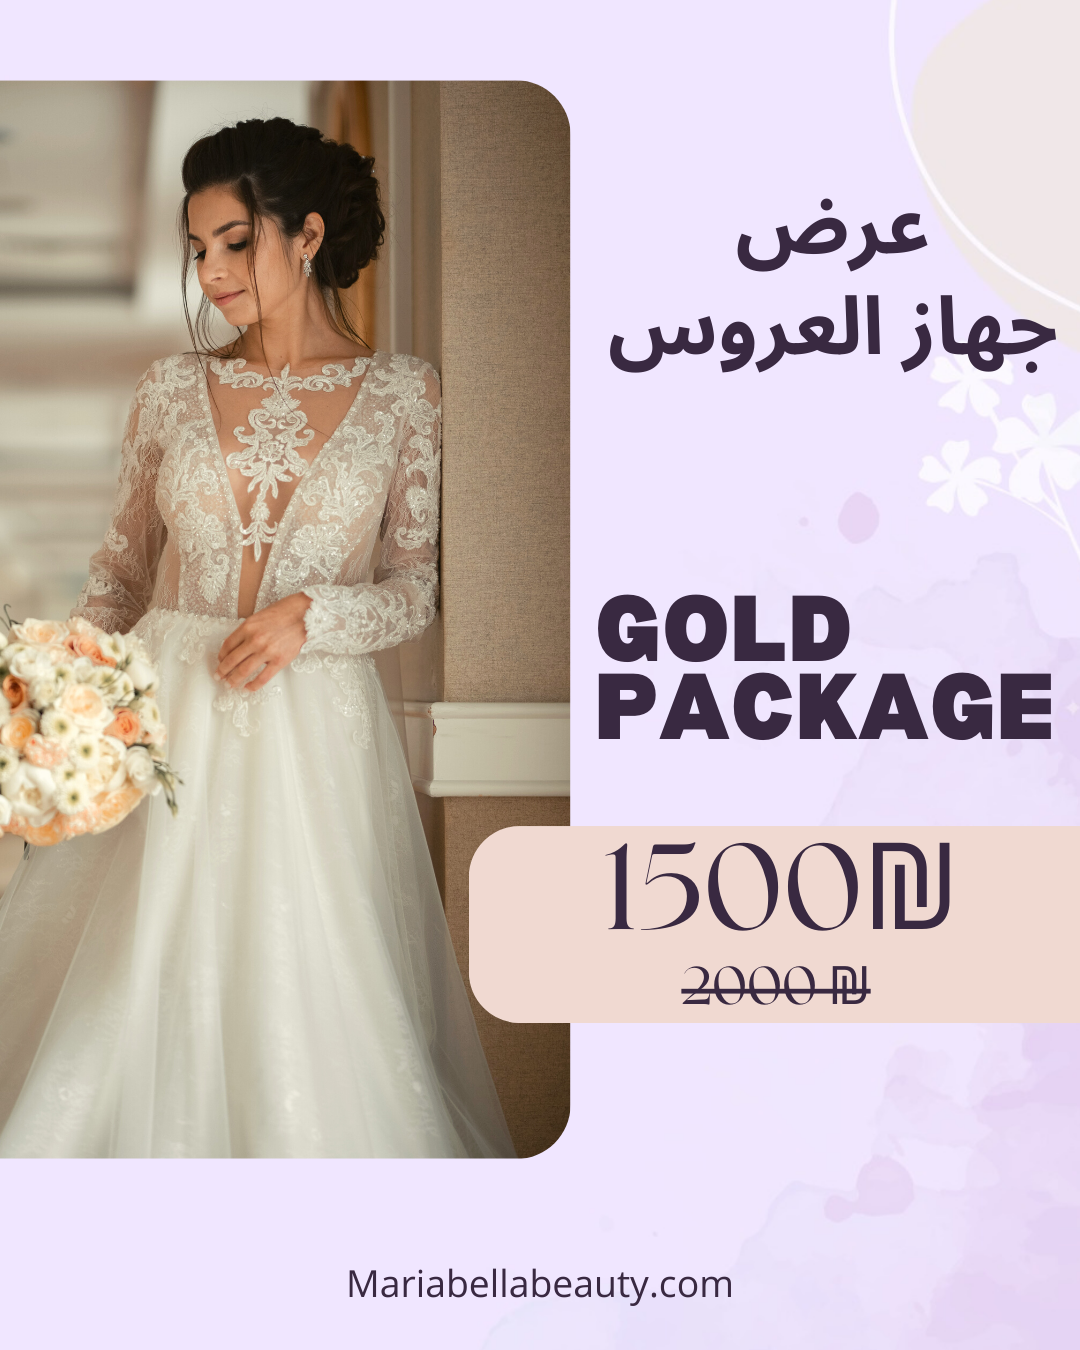 Gold bridal package